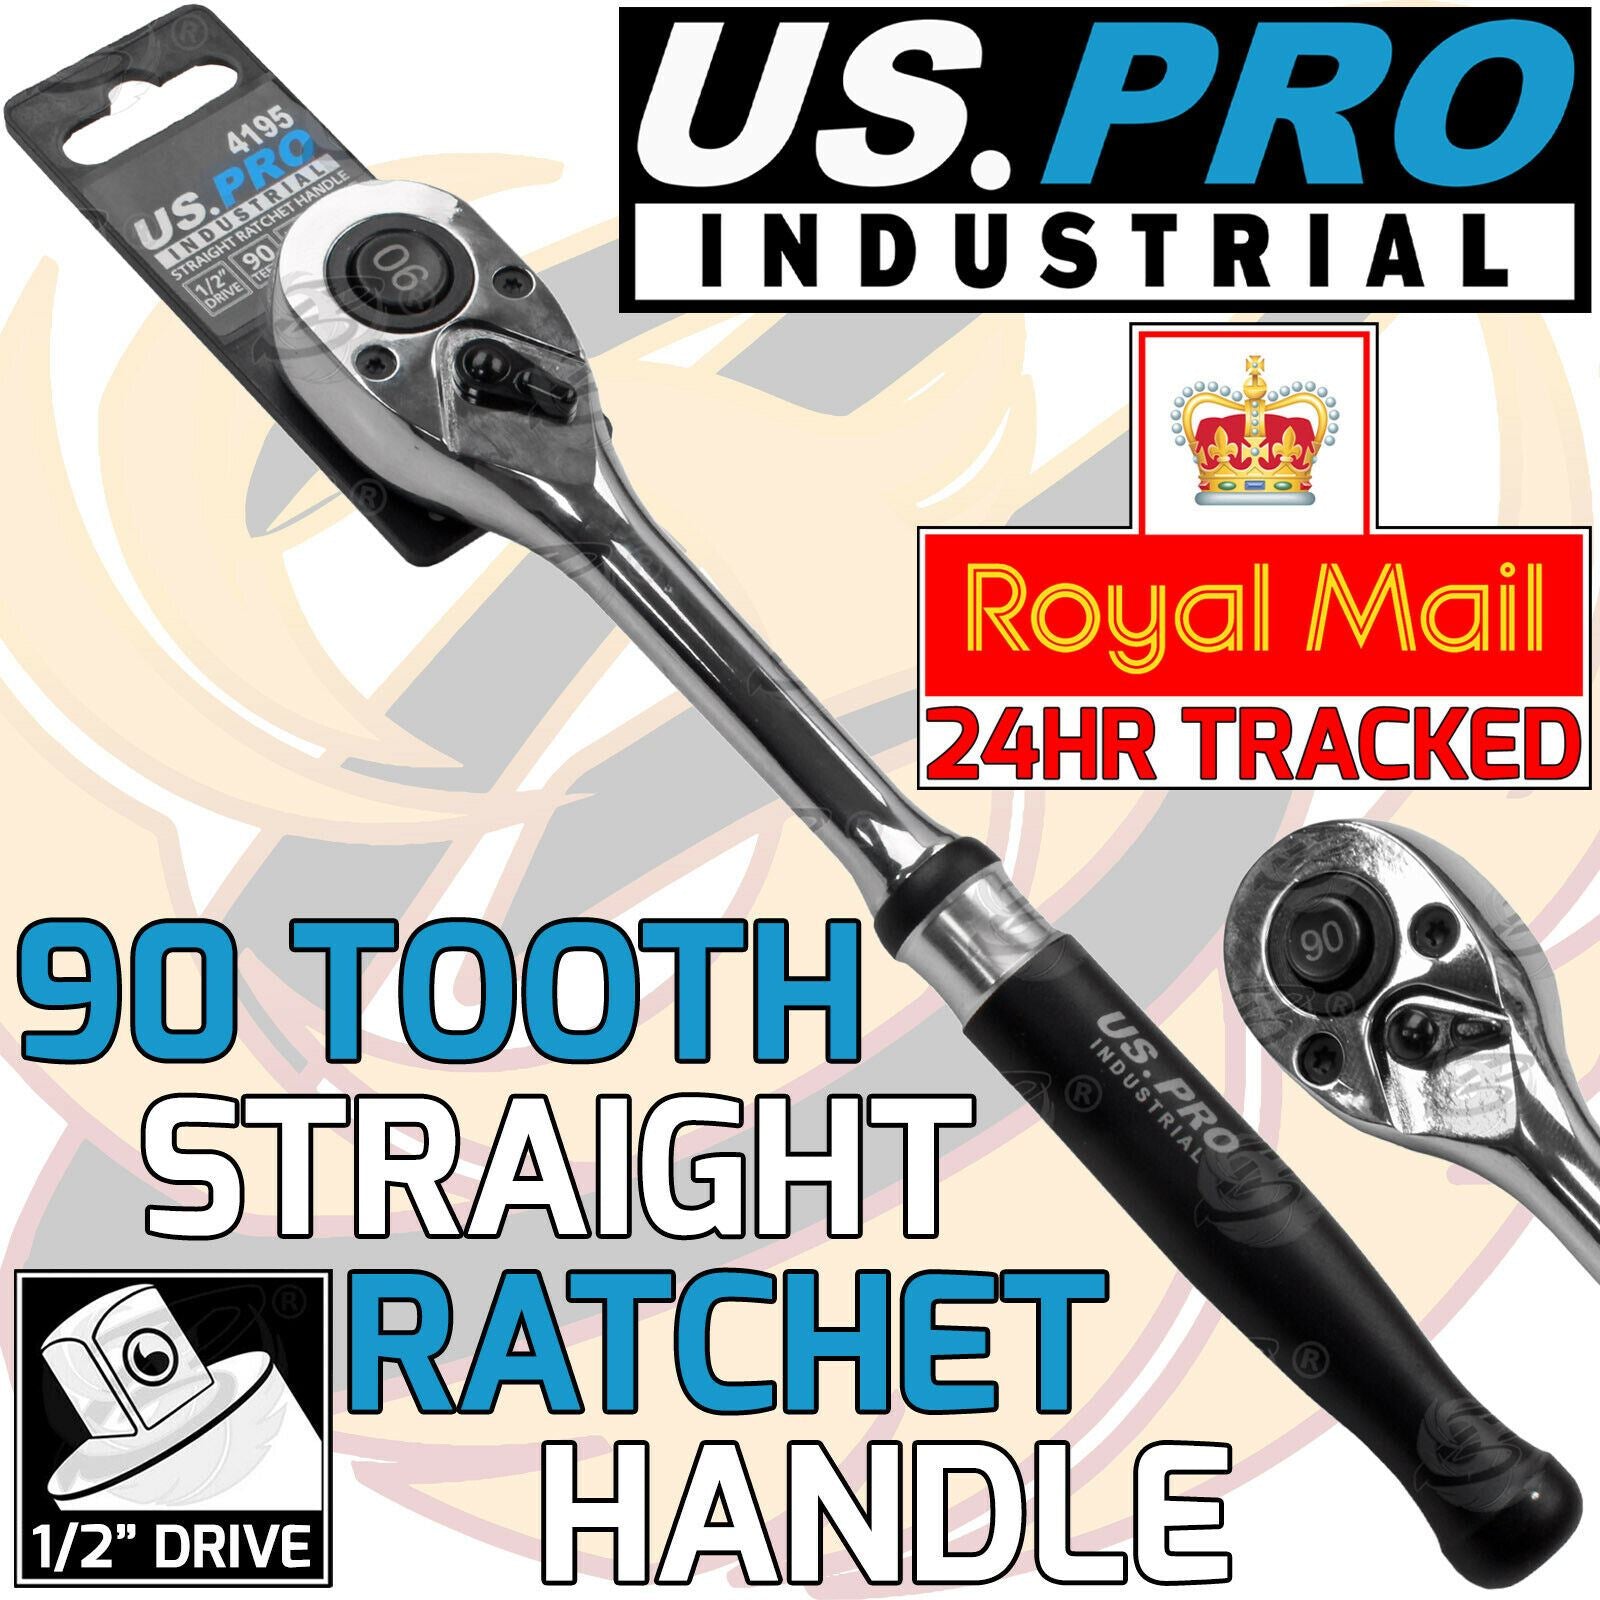 US PRO INDUSTRIAL 1/2" DRIVE 90 TOOTH RATCHET HANDLE